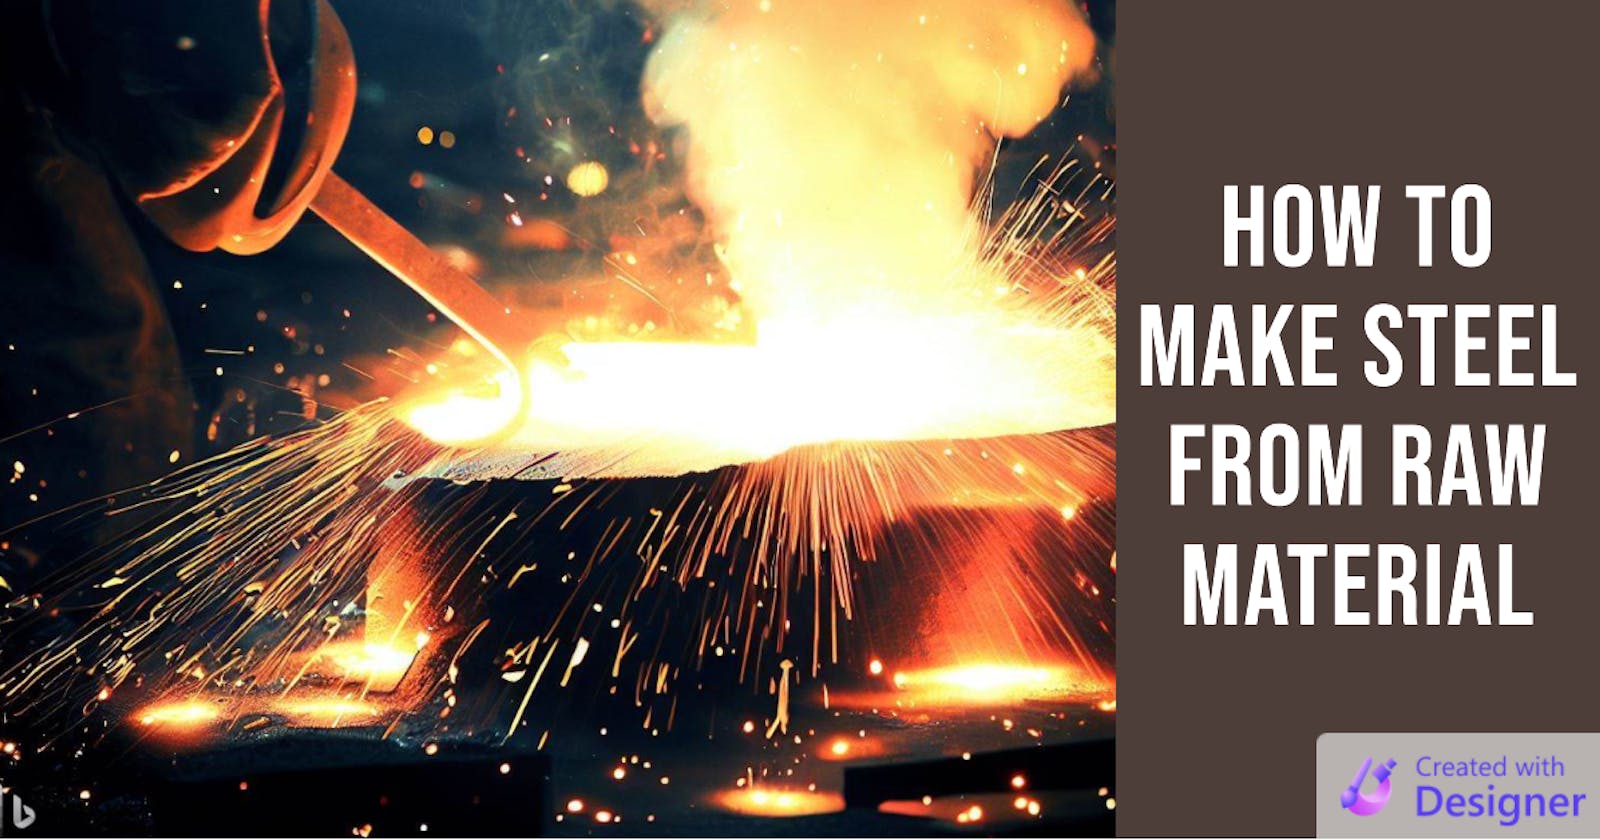 How to Make Steel from Raw Material: A Step-by-Step Guide